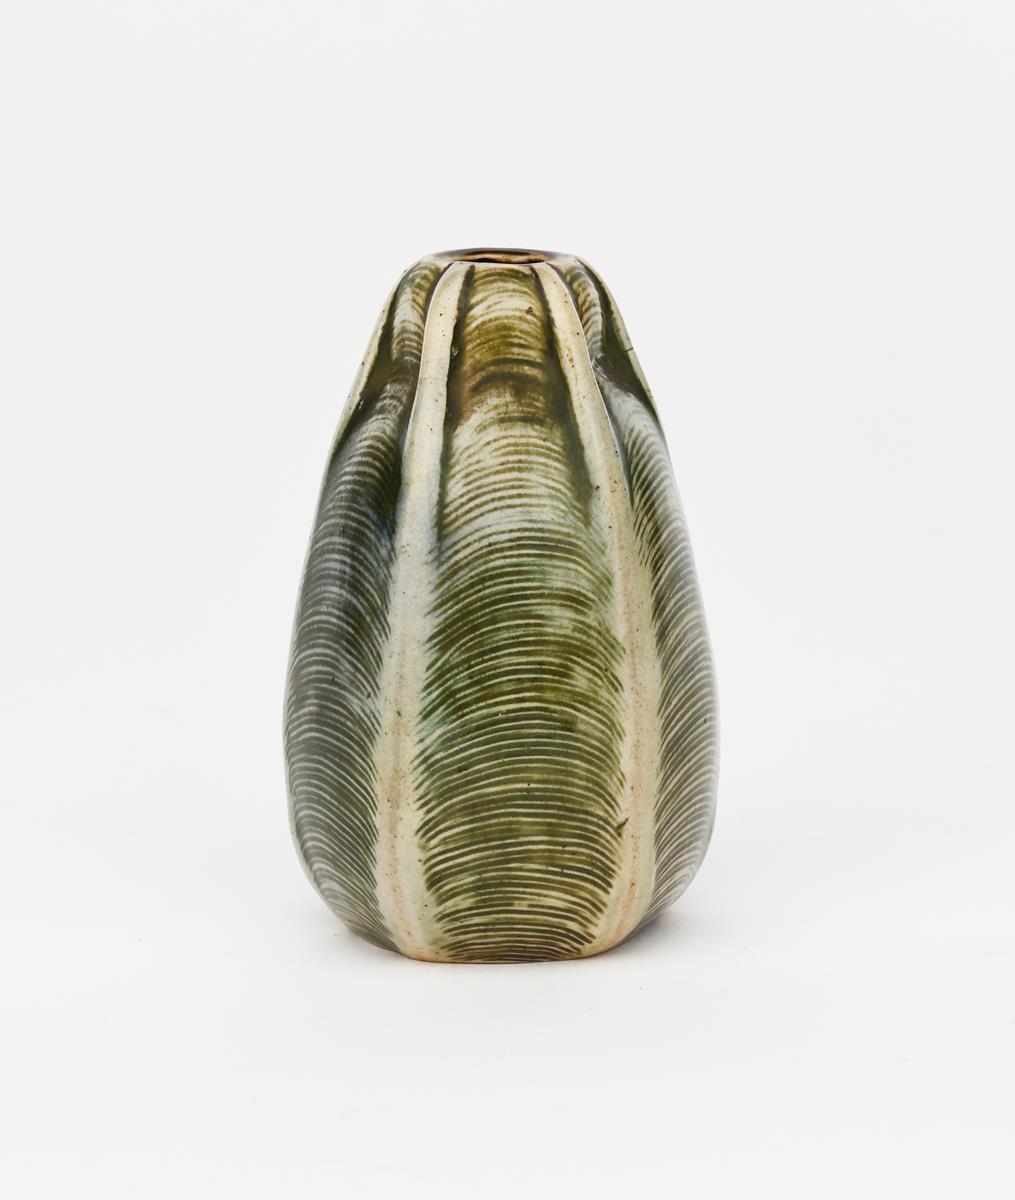 A Martin Brothers stoneware gourd vase by Edwin & Walter Martin, shouldered form, modelled with